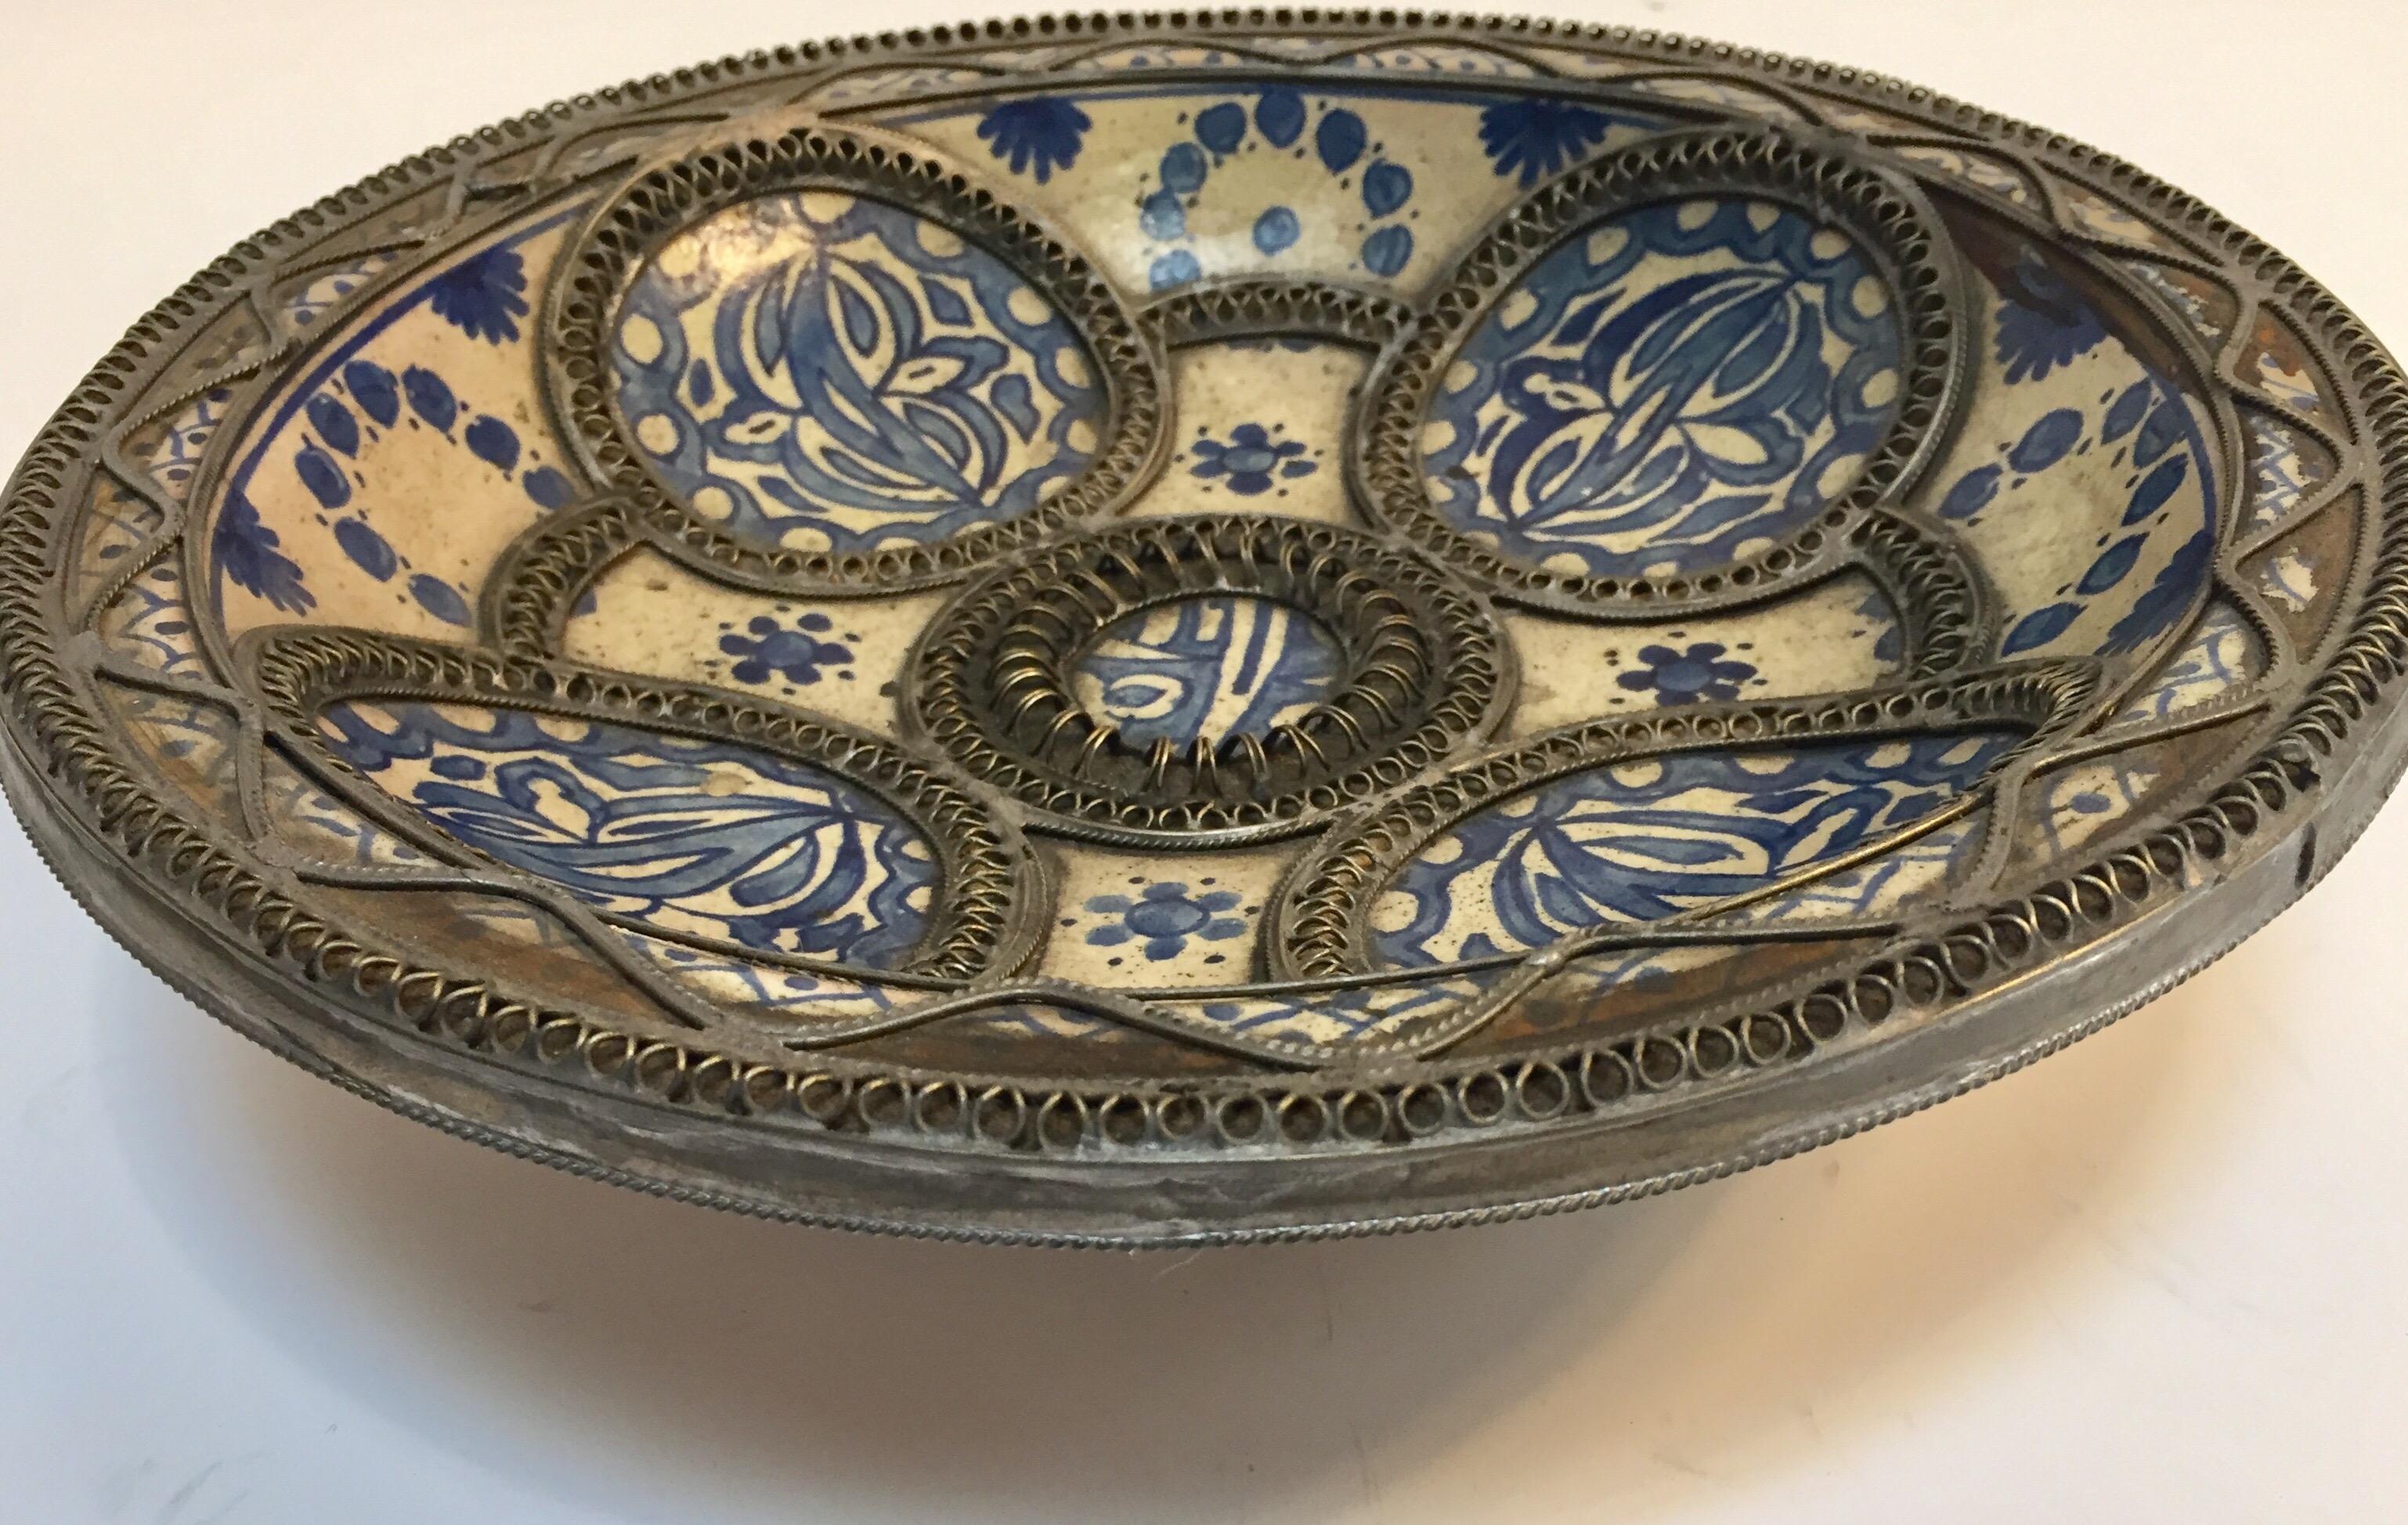 20th Century Decorative Moroccan Blue and White Handcrafted Ceramic Bowl from Fez